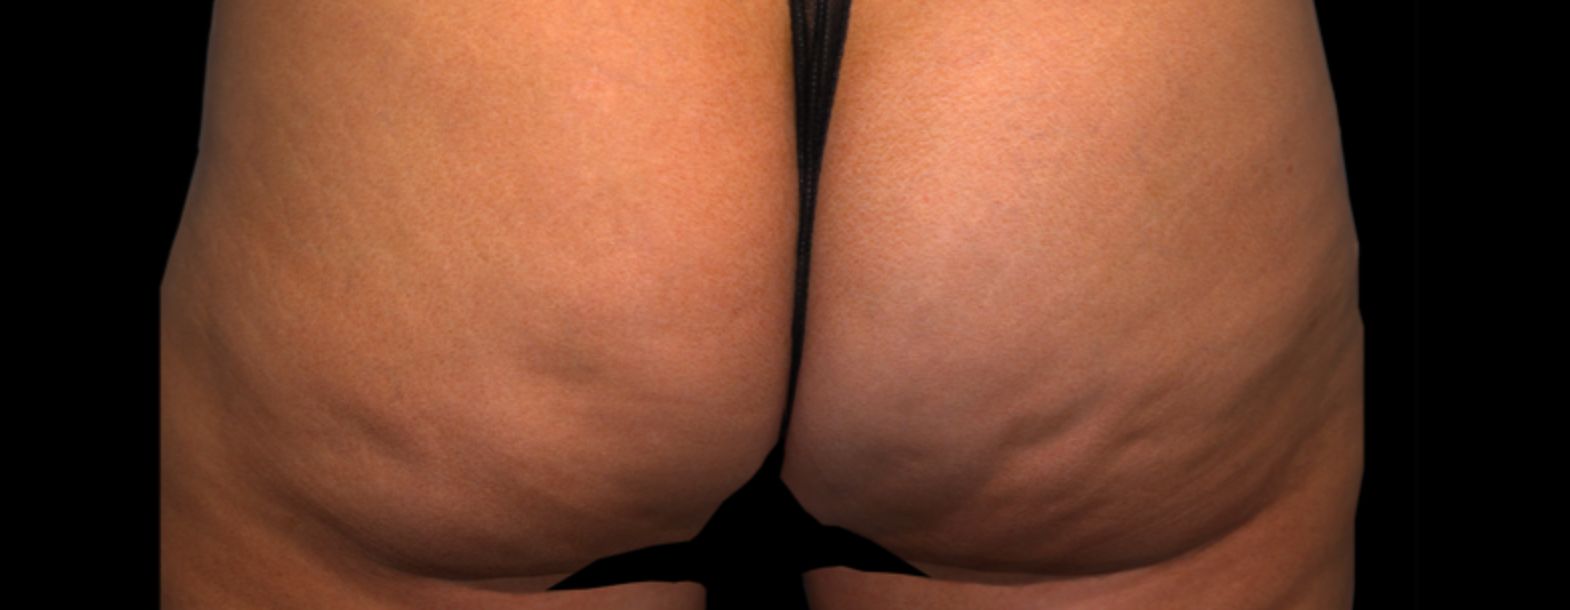 before qwo cellulite results